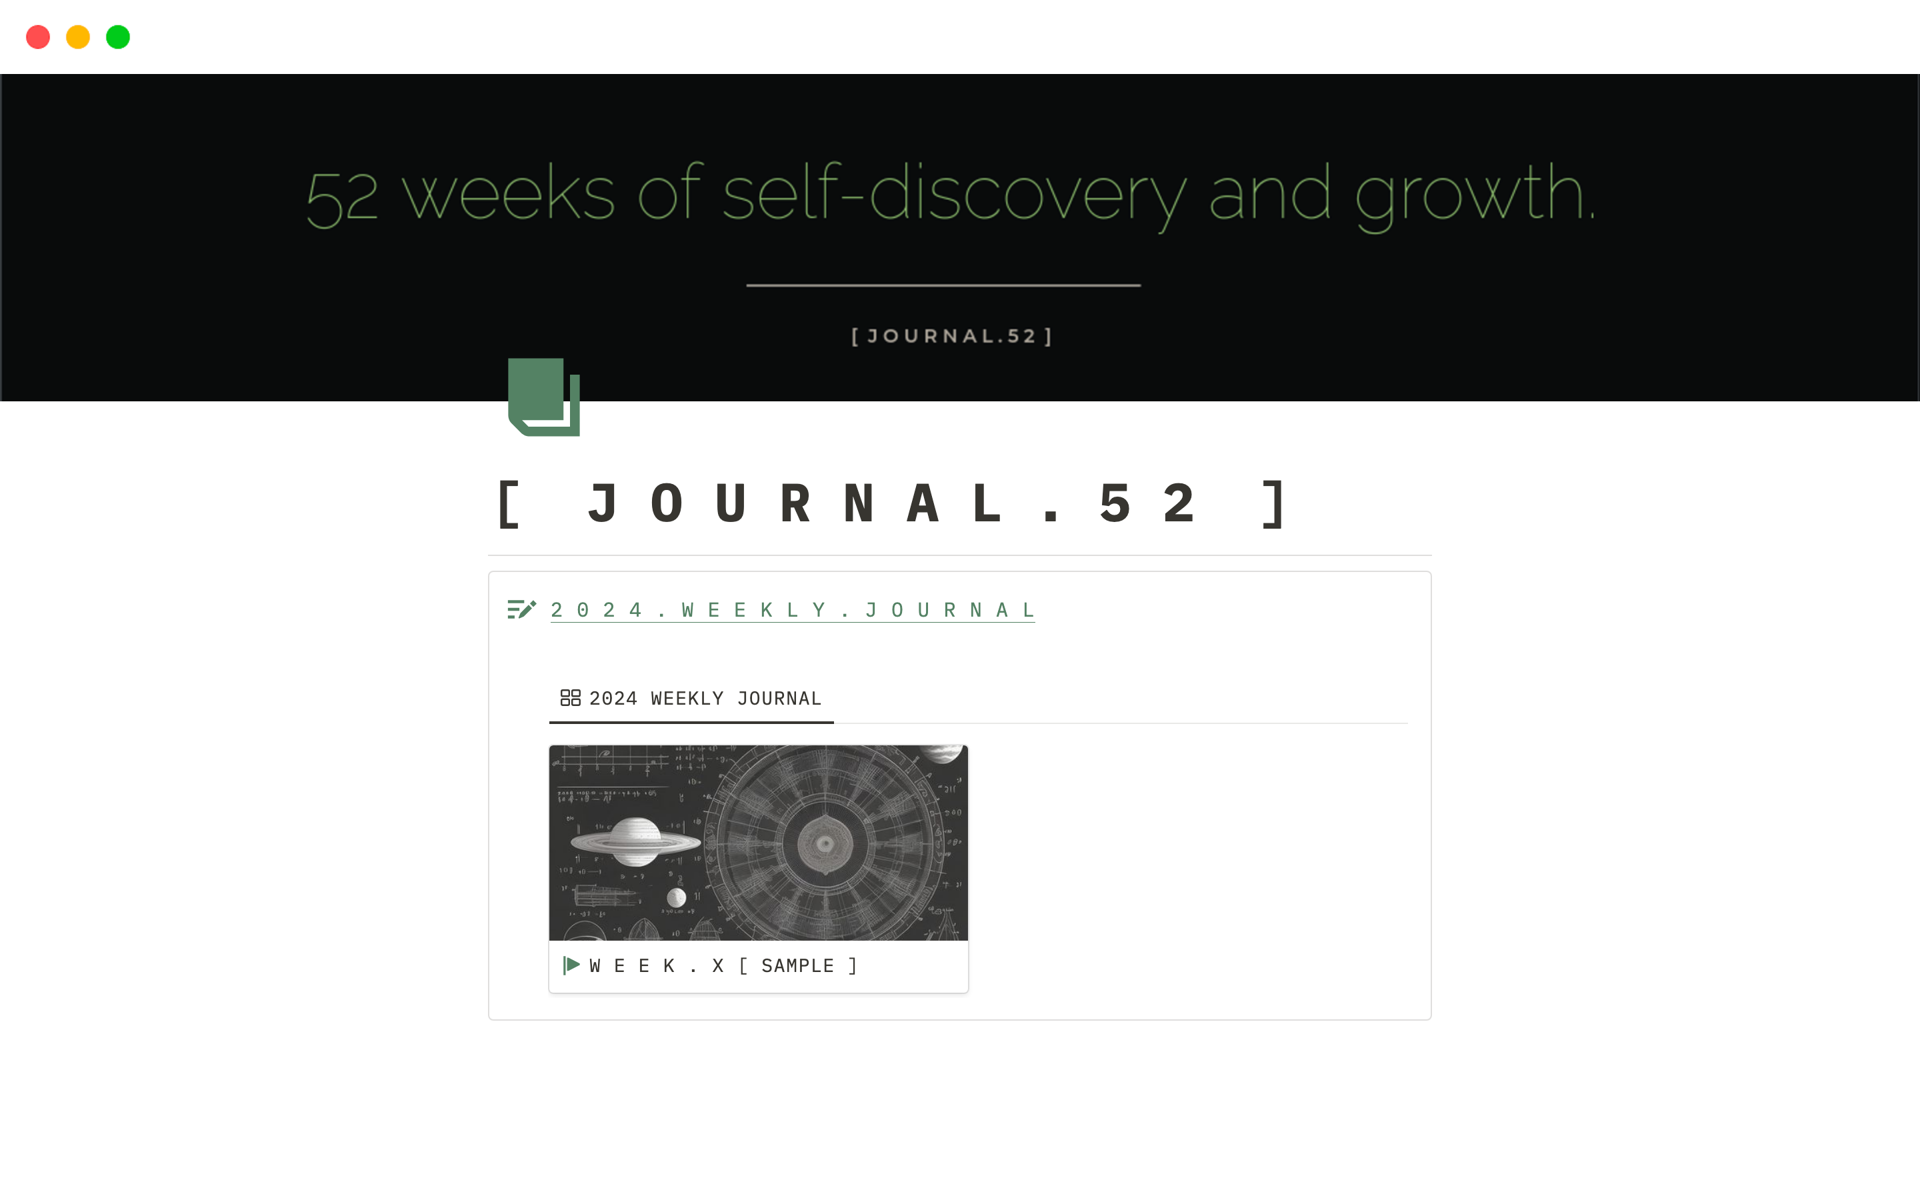 JOURNAL 52 is a minimal 52-week journal. Each week is a new entry/page. You can choose to append to the page daily, bi-weekly, once a week or whatever, you choose your schedule.